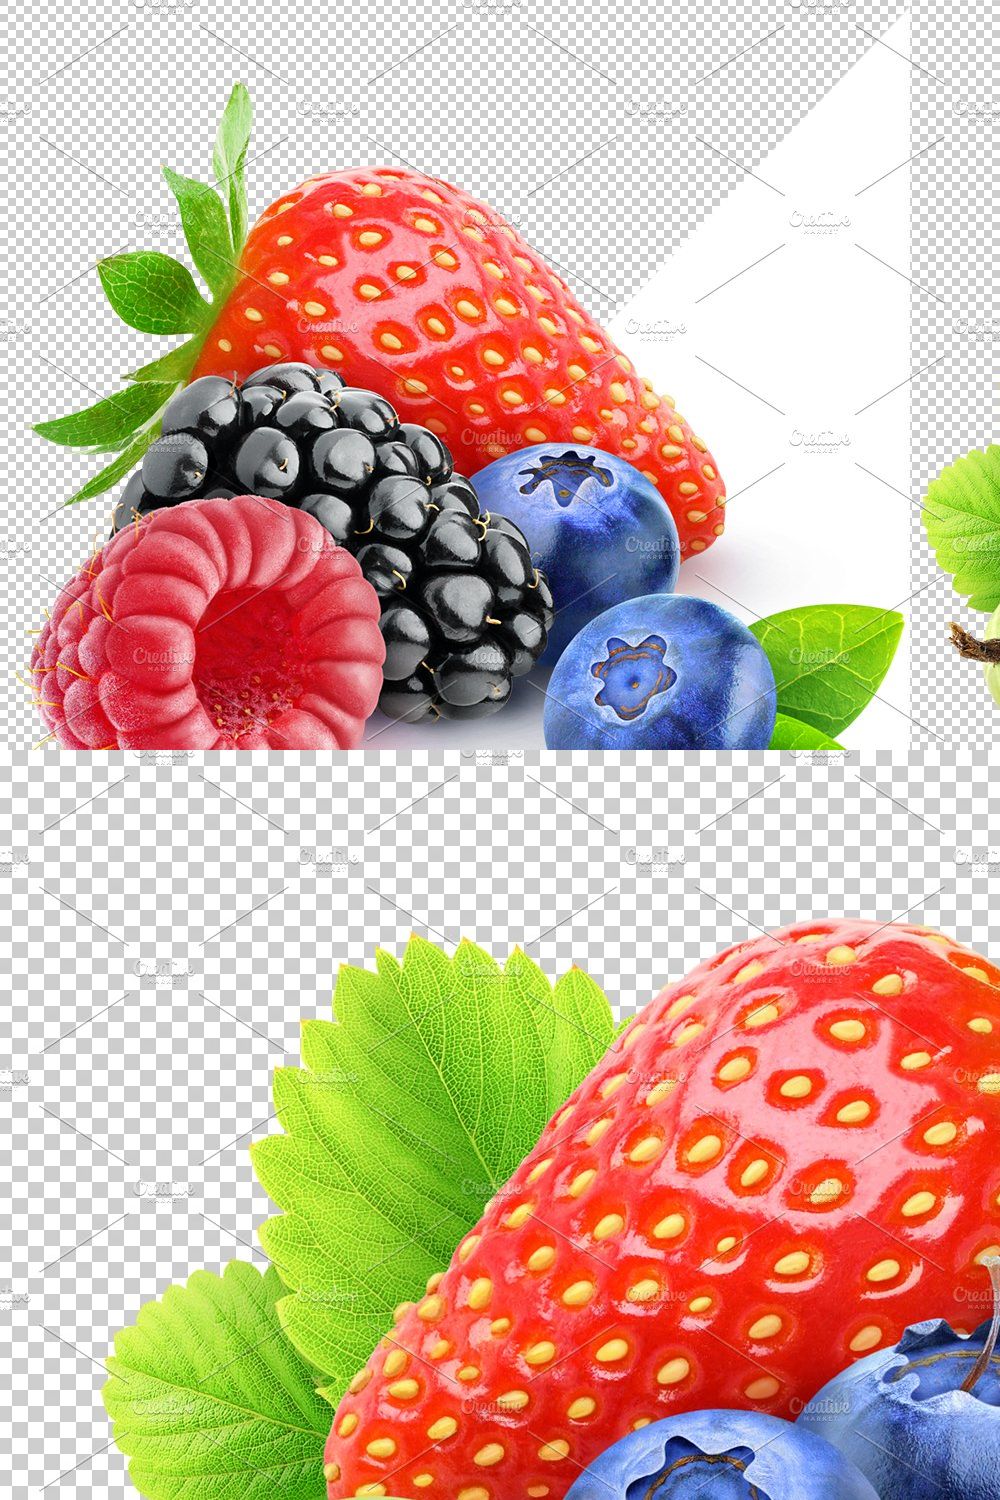 Isolated berries pinterest preview image.